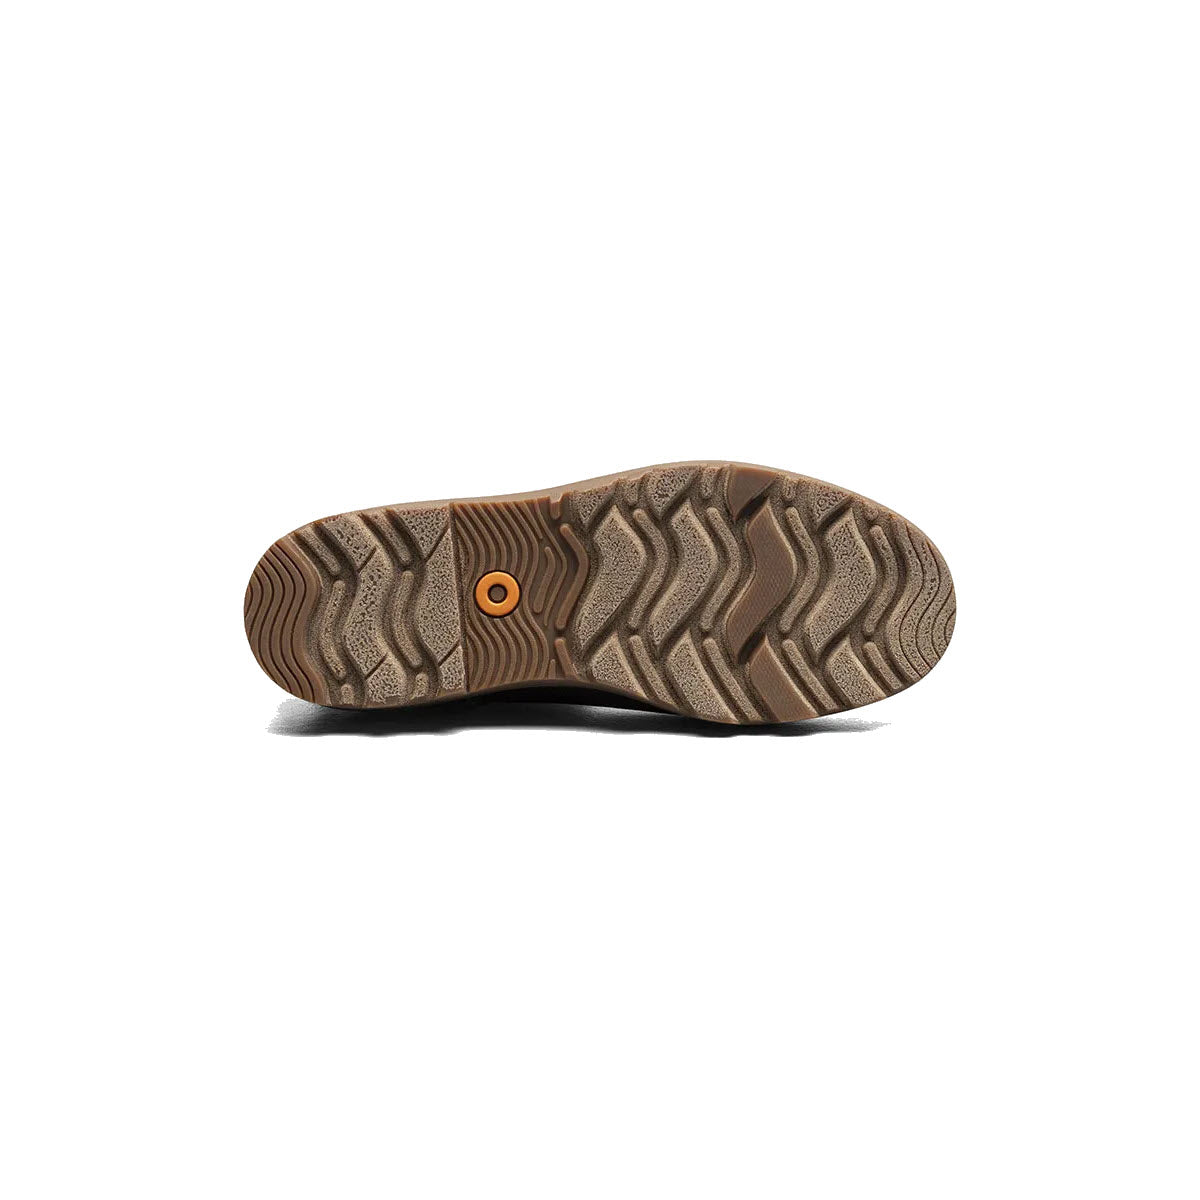 Bottom view of a Bogs shoe sole with intricate tread pattern and a small orange circular detail in the center, featuring BOGS Rebound Cushioning.